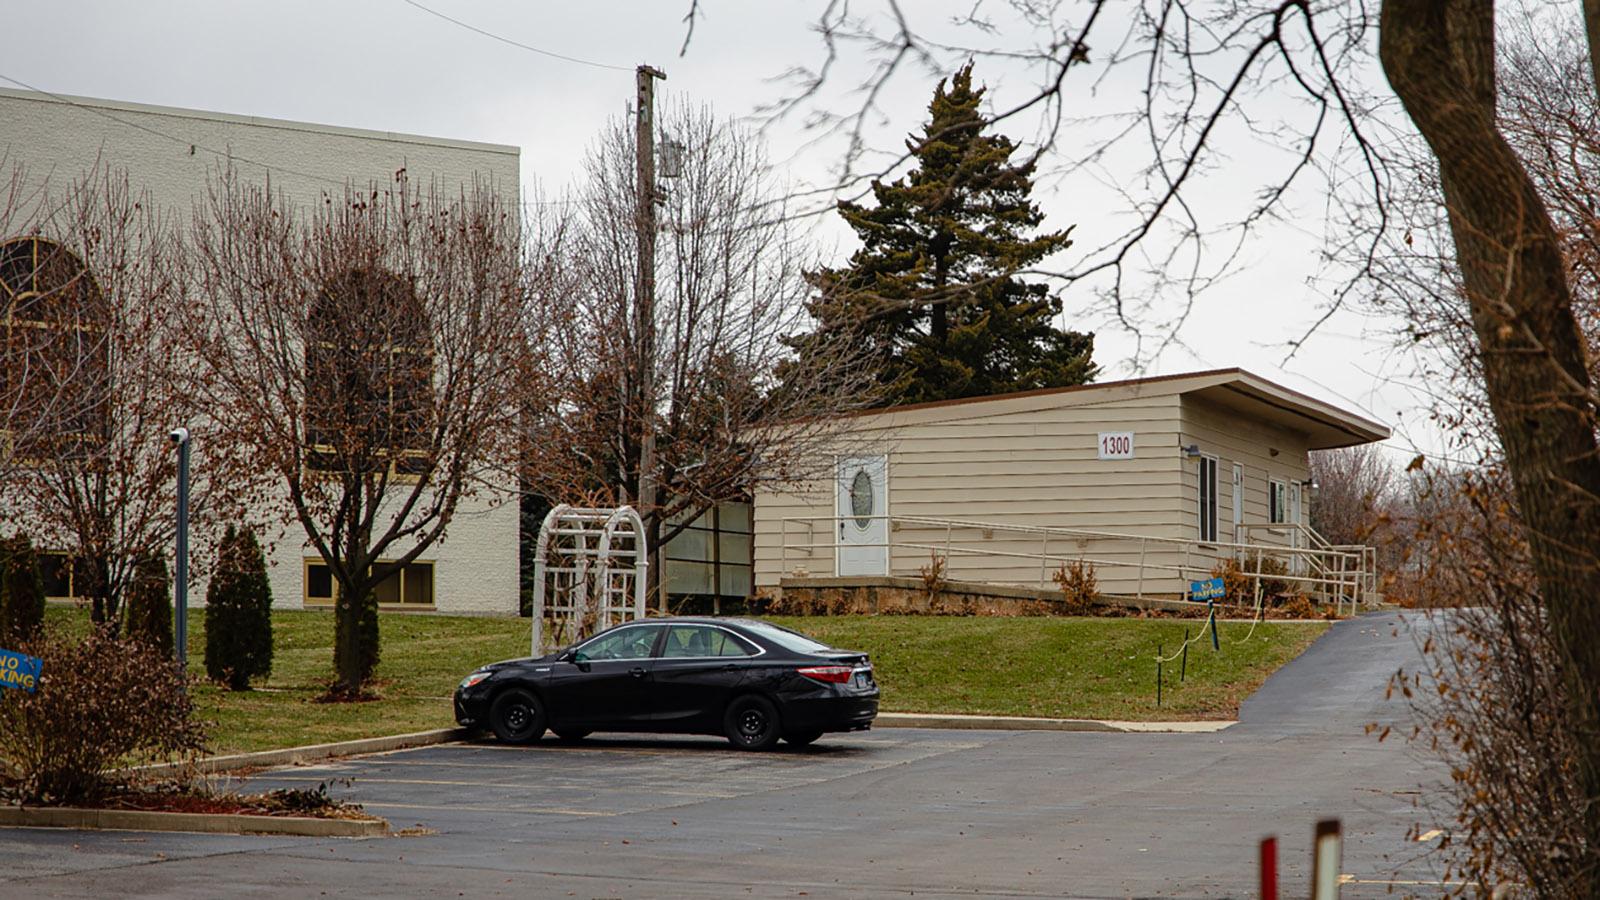 A school building on the campus of the Institute of the Islamic Education is located adjacent to the listed residence of a convicted sex offender. (Michael Izquierdo / WTTW News) 